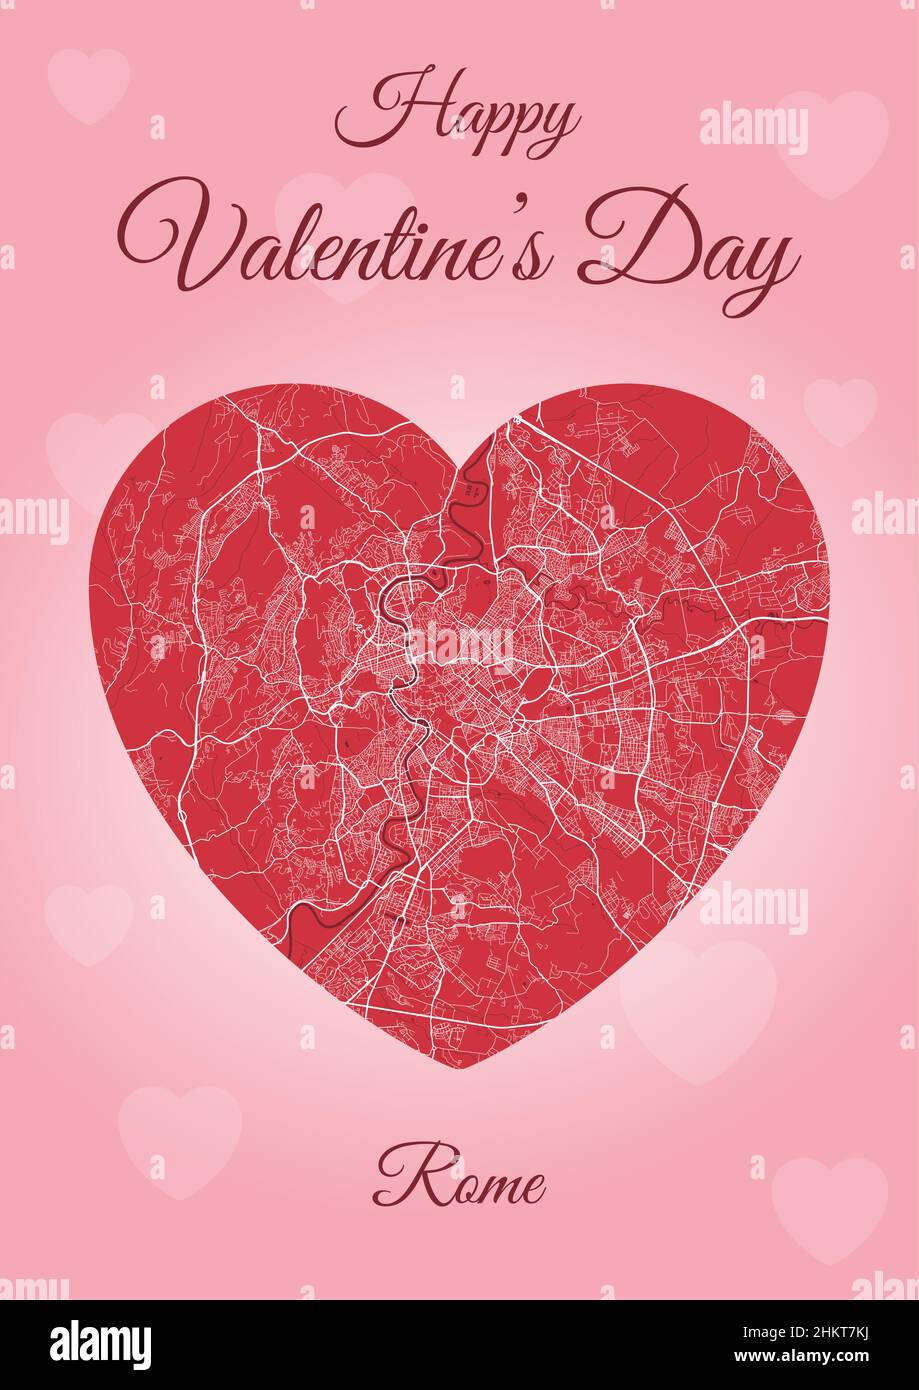 Happy Valentine's day holiday card with Rome map in heart shape. Vertical A4 Pink and red color vector illustration. Love city travel cityscape. Stock Vector